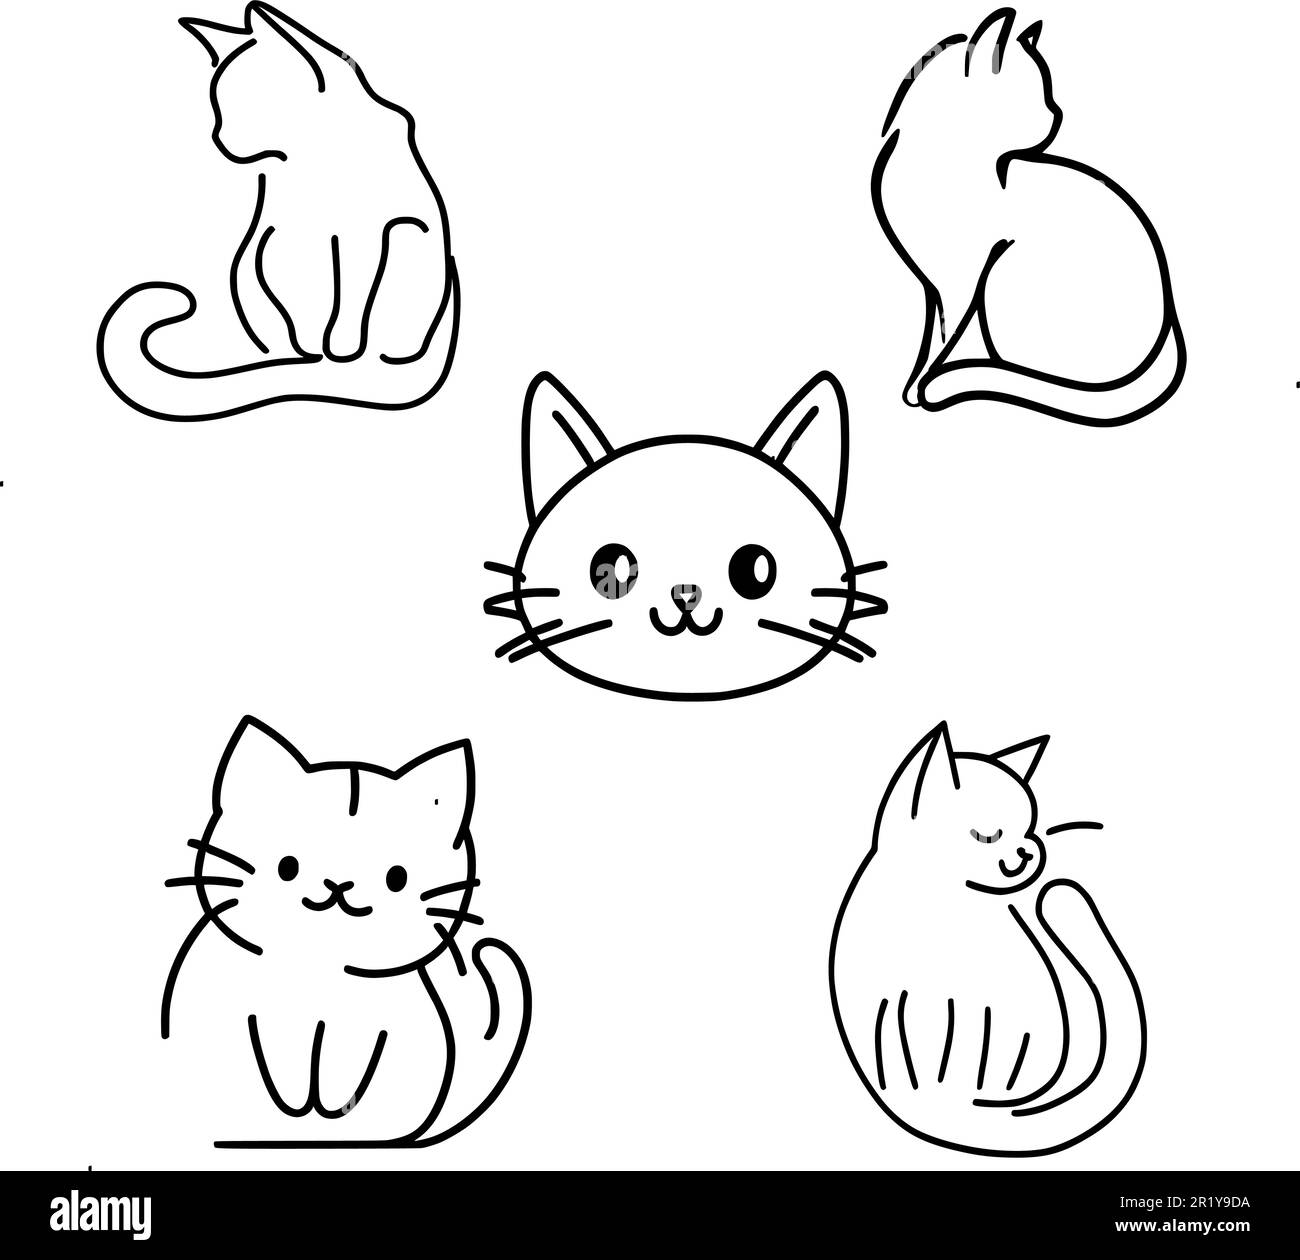 Cute Cat Vector Illustrations.perfect for any project that needs a touch of adorableness. The cats are drawn in a simple, yet stylish, vector format. Stock Vector